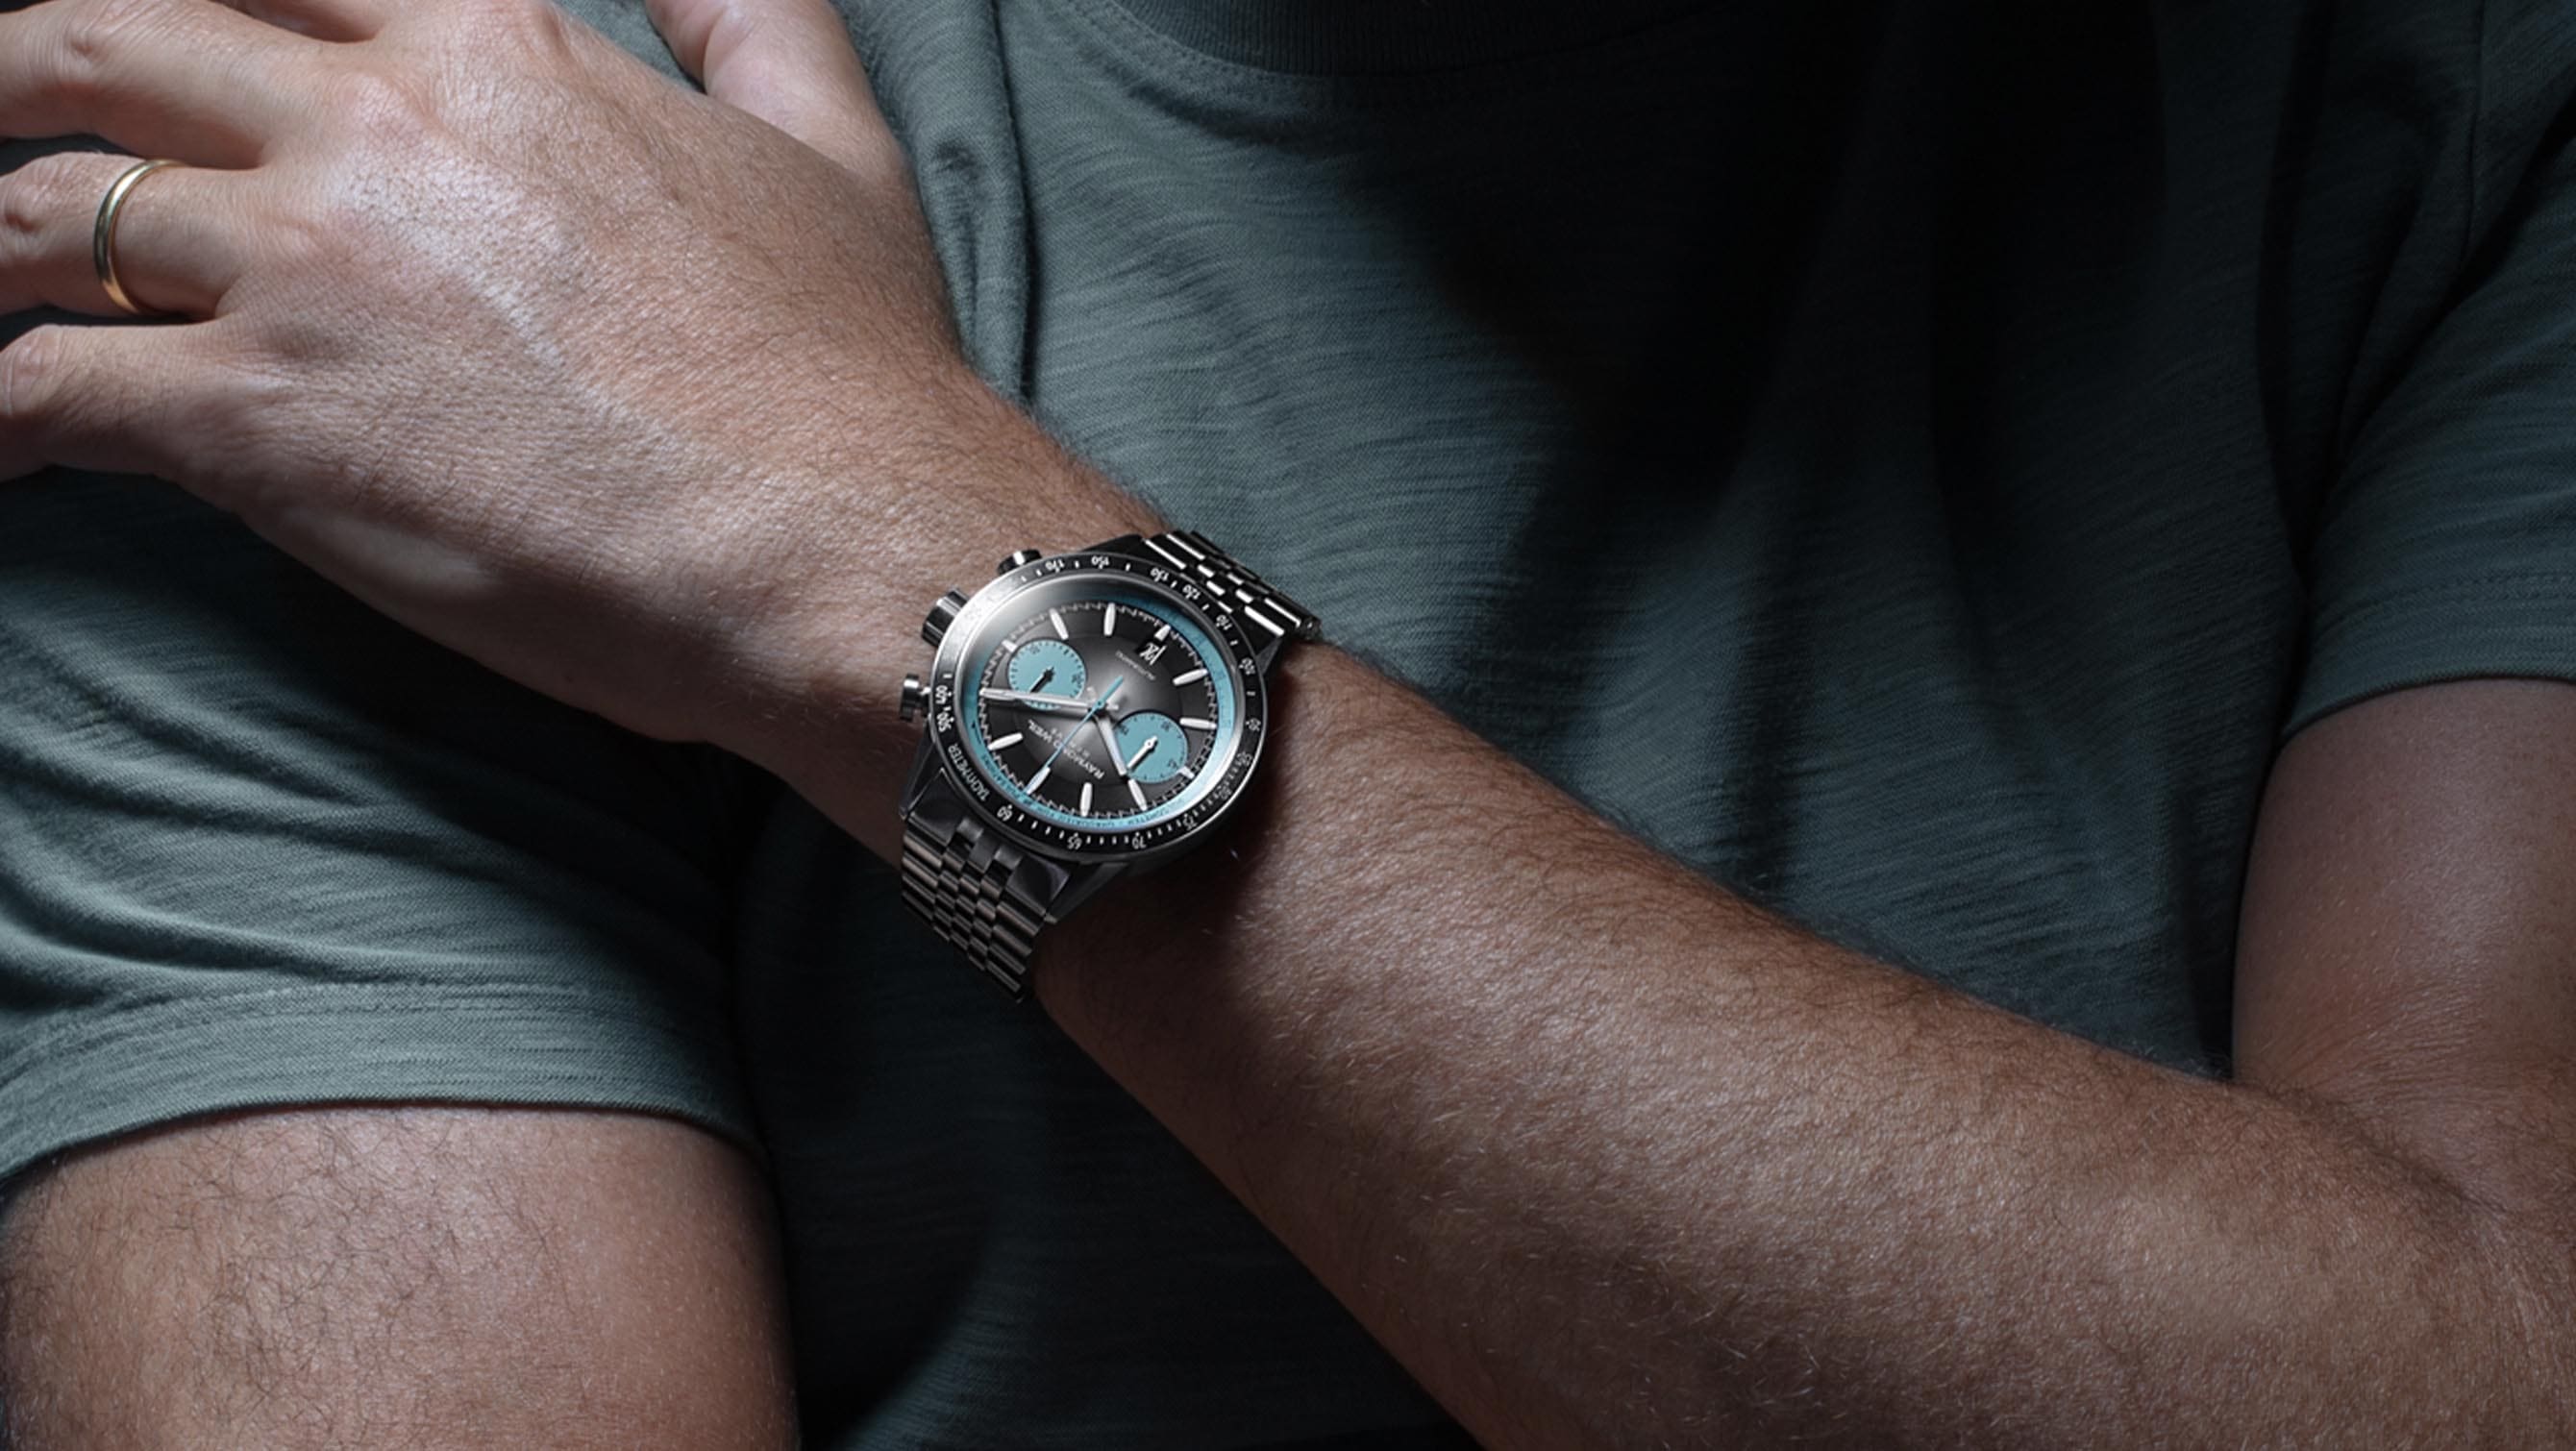 The Raymond Weil Freelancer Pop Bi-Compax Chronograph is a high-contrast proposition with a titanium build